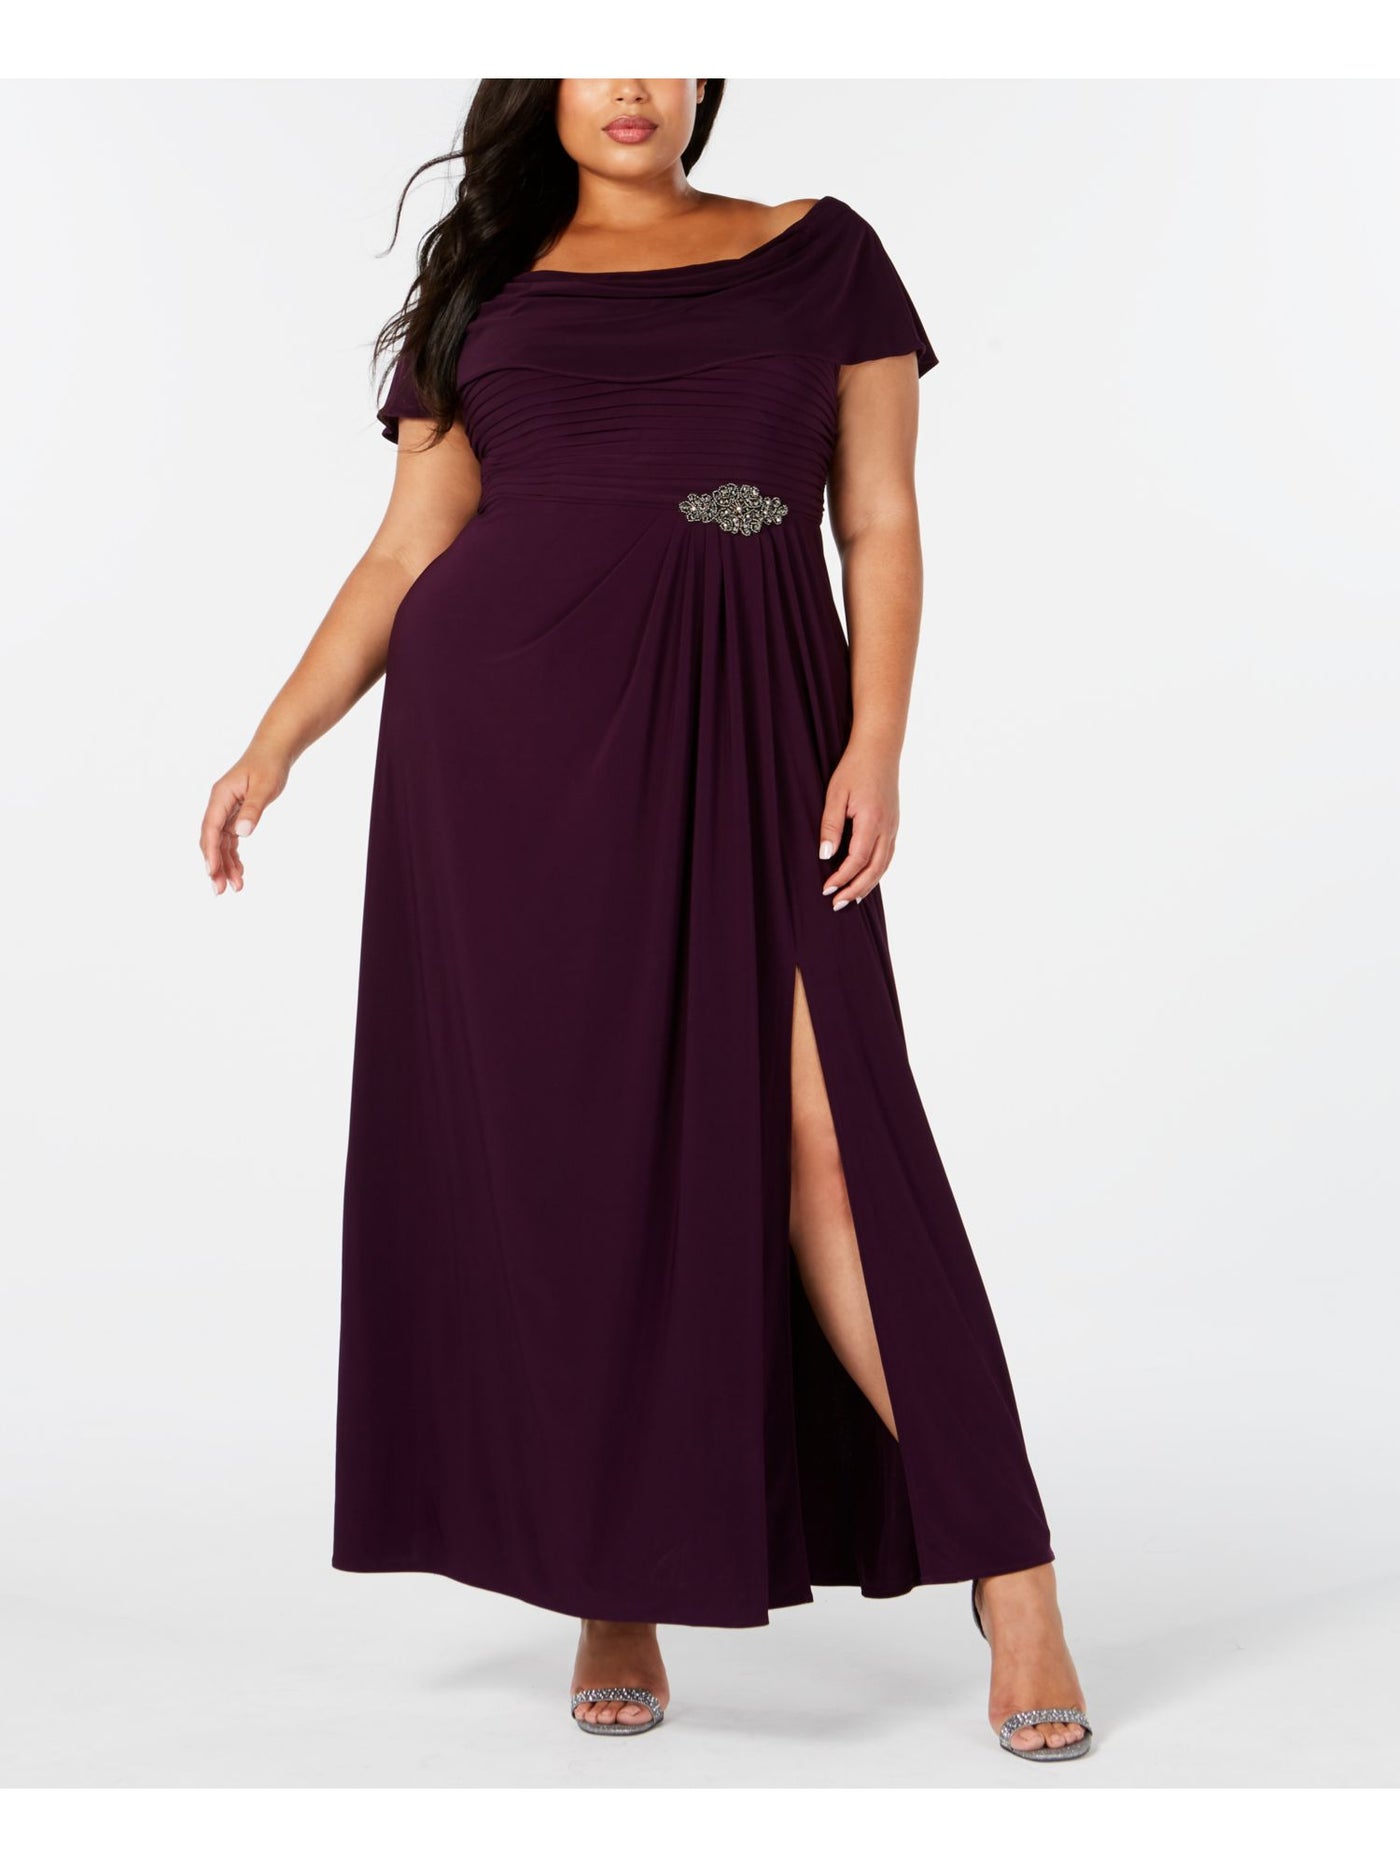 ALEX EVENINGS Womens Purple Embellished Pleated Gown Short Sleeve Cowl Neck Maxi Formal Shift Dress Plus 18W